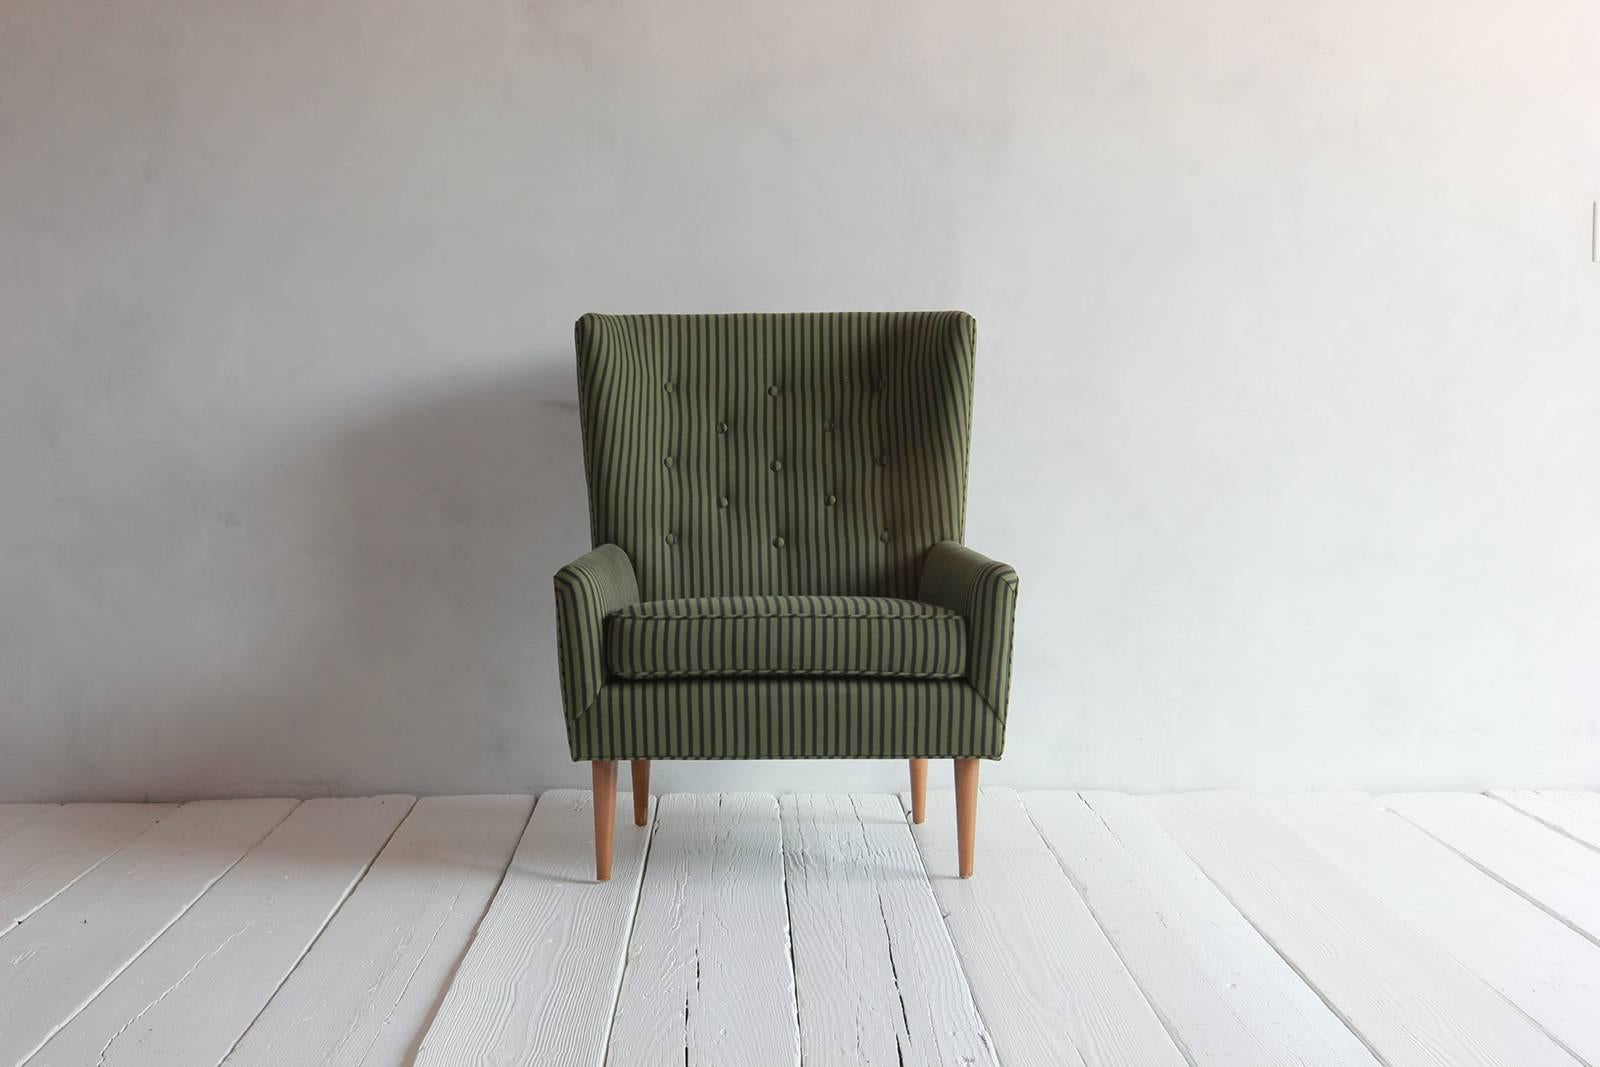 Pair of French armchairs upholstered striped green and black howe fabric.